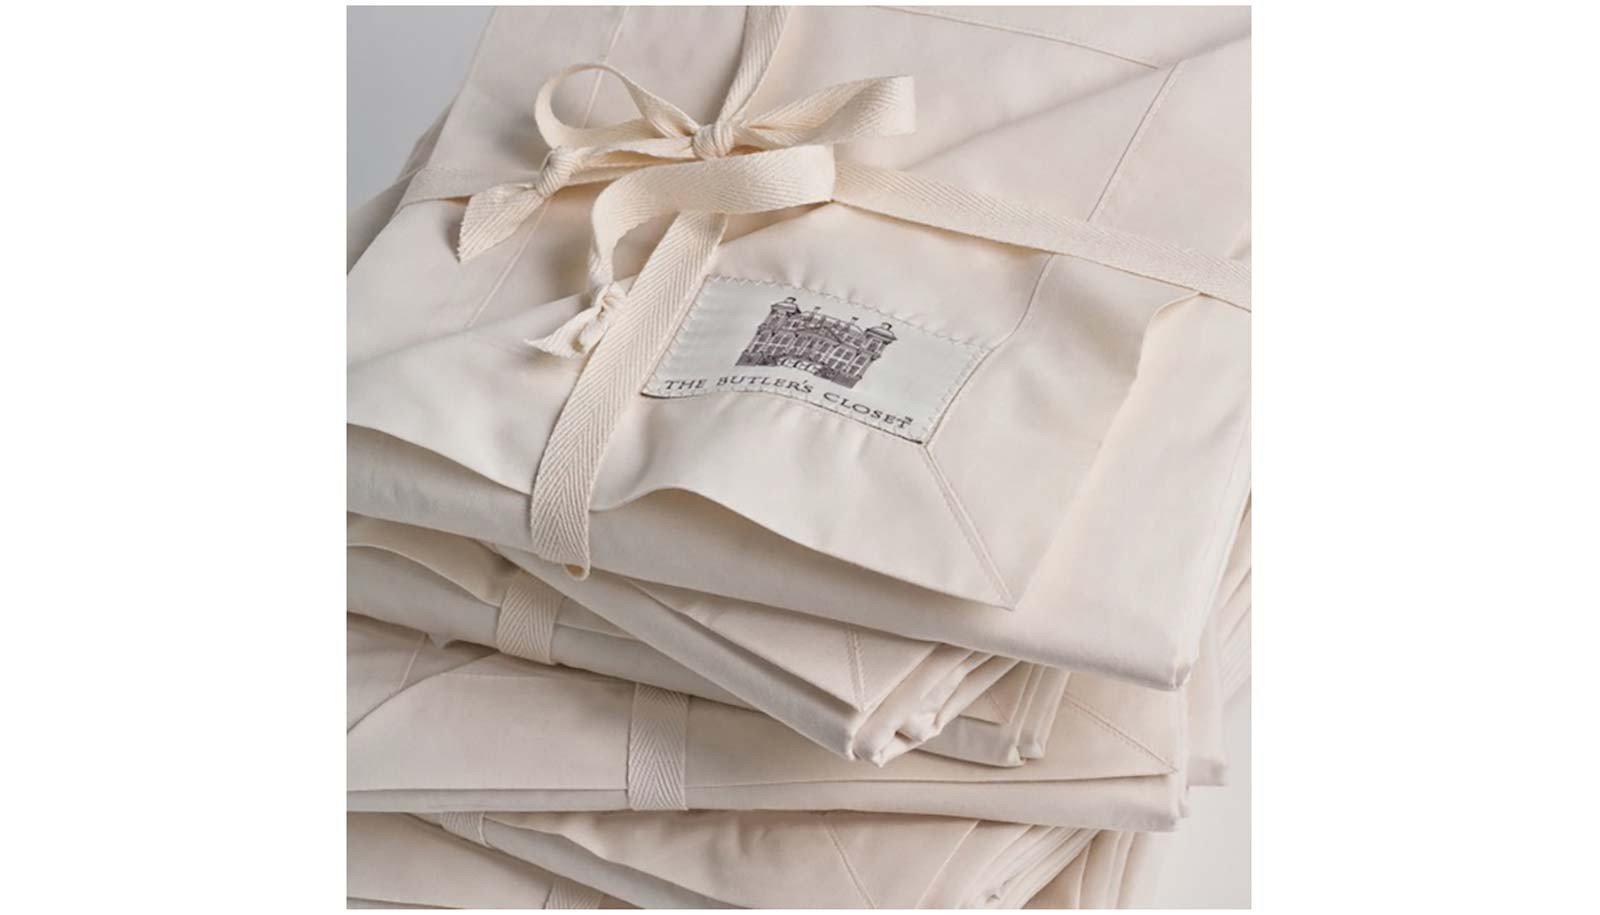 Bundle Of Cotton Furniture Dust Covers With The Butler's Closet Logo